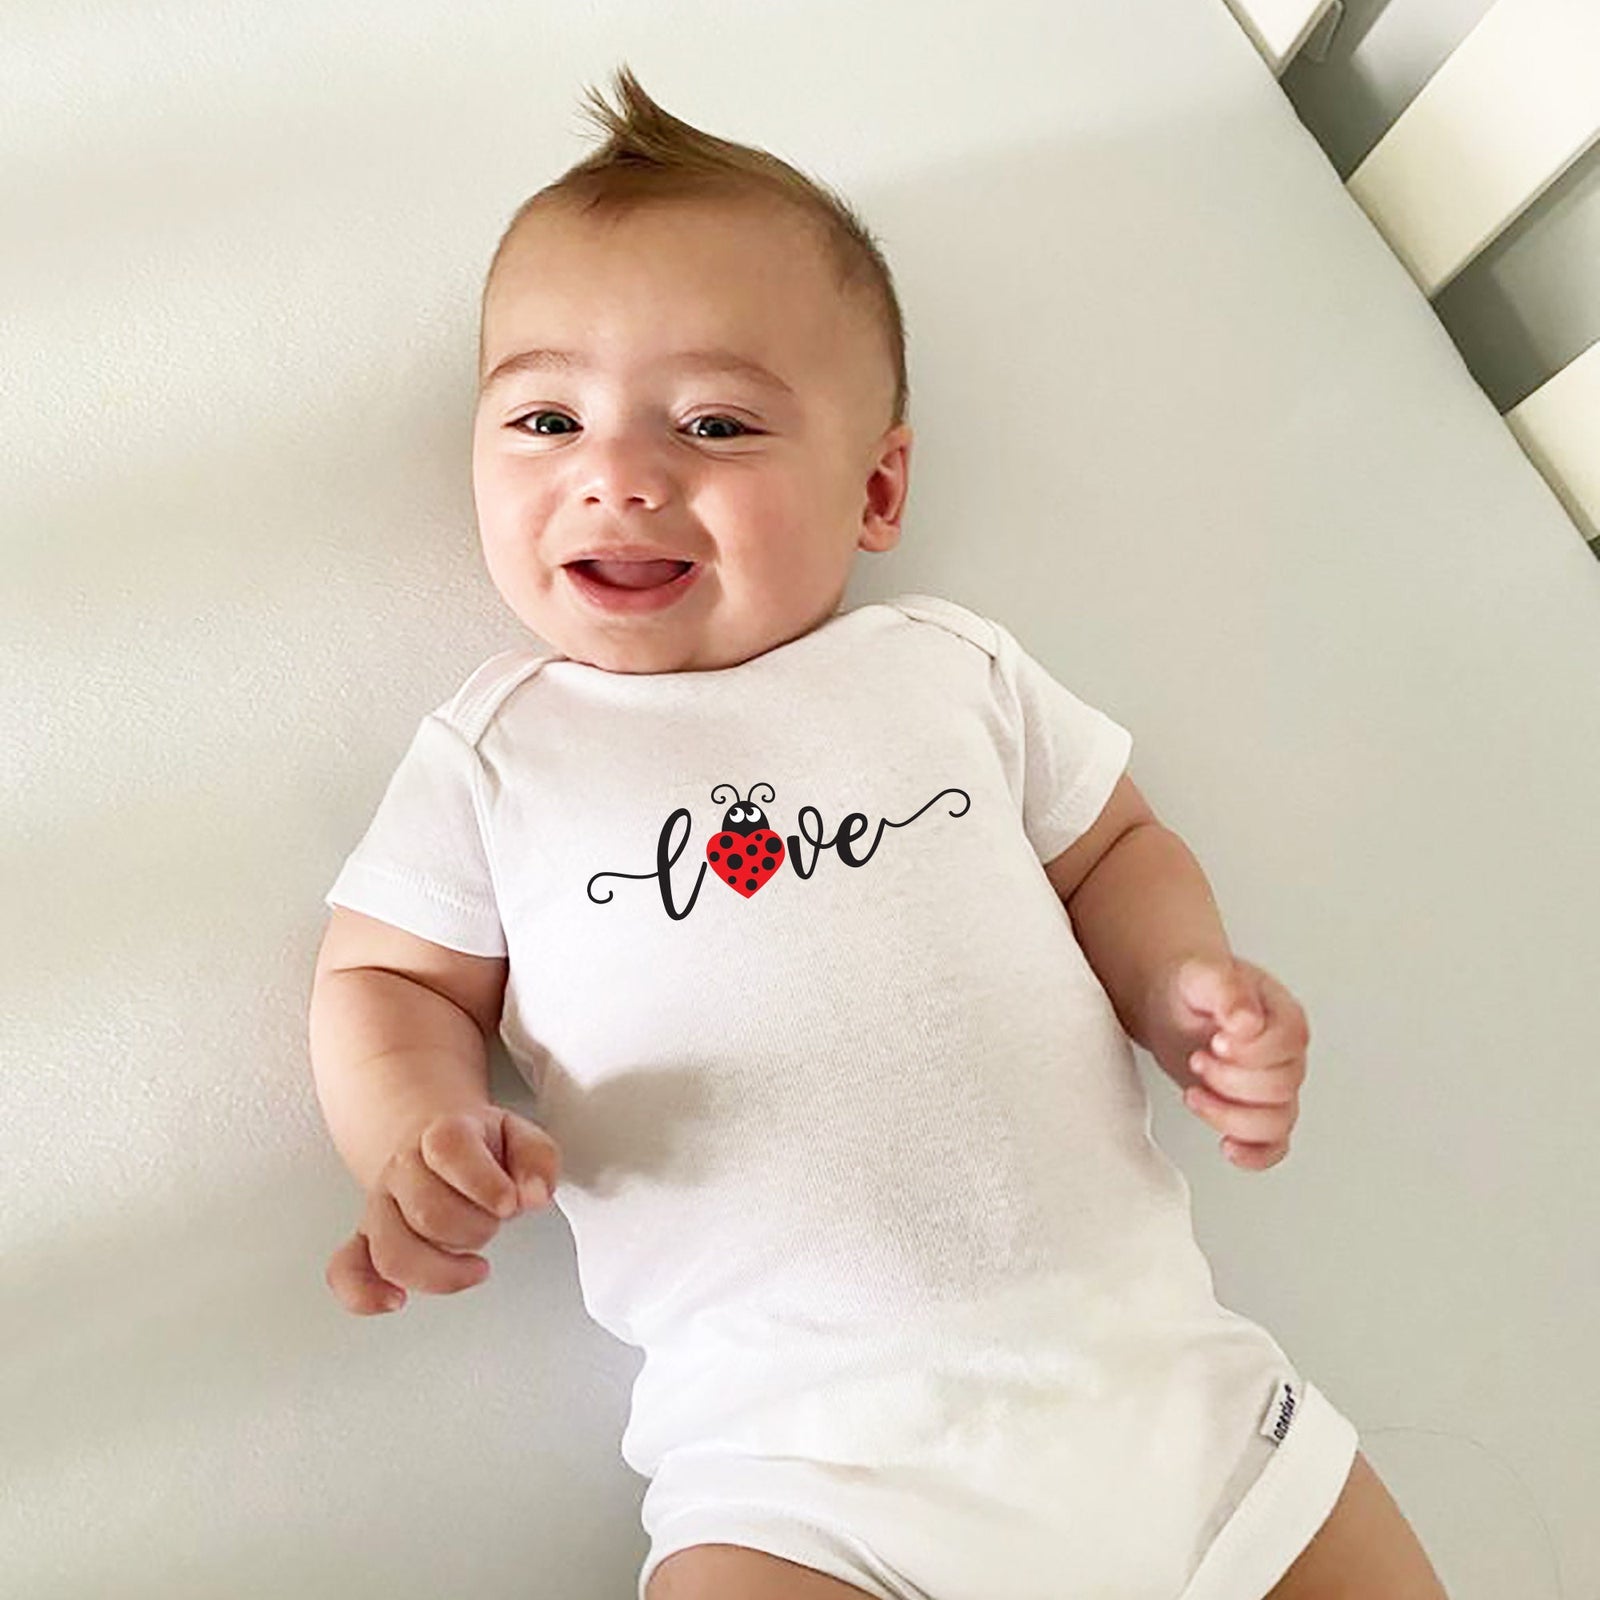 Love Lady Bug Shirt - My First Valentine's Day Onesie for Baby Boy or Girl - 1st Valentines Shirt